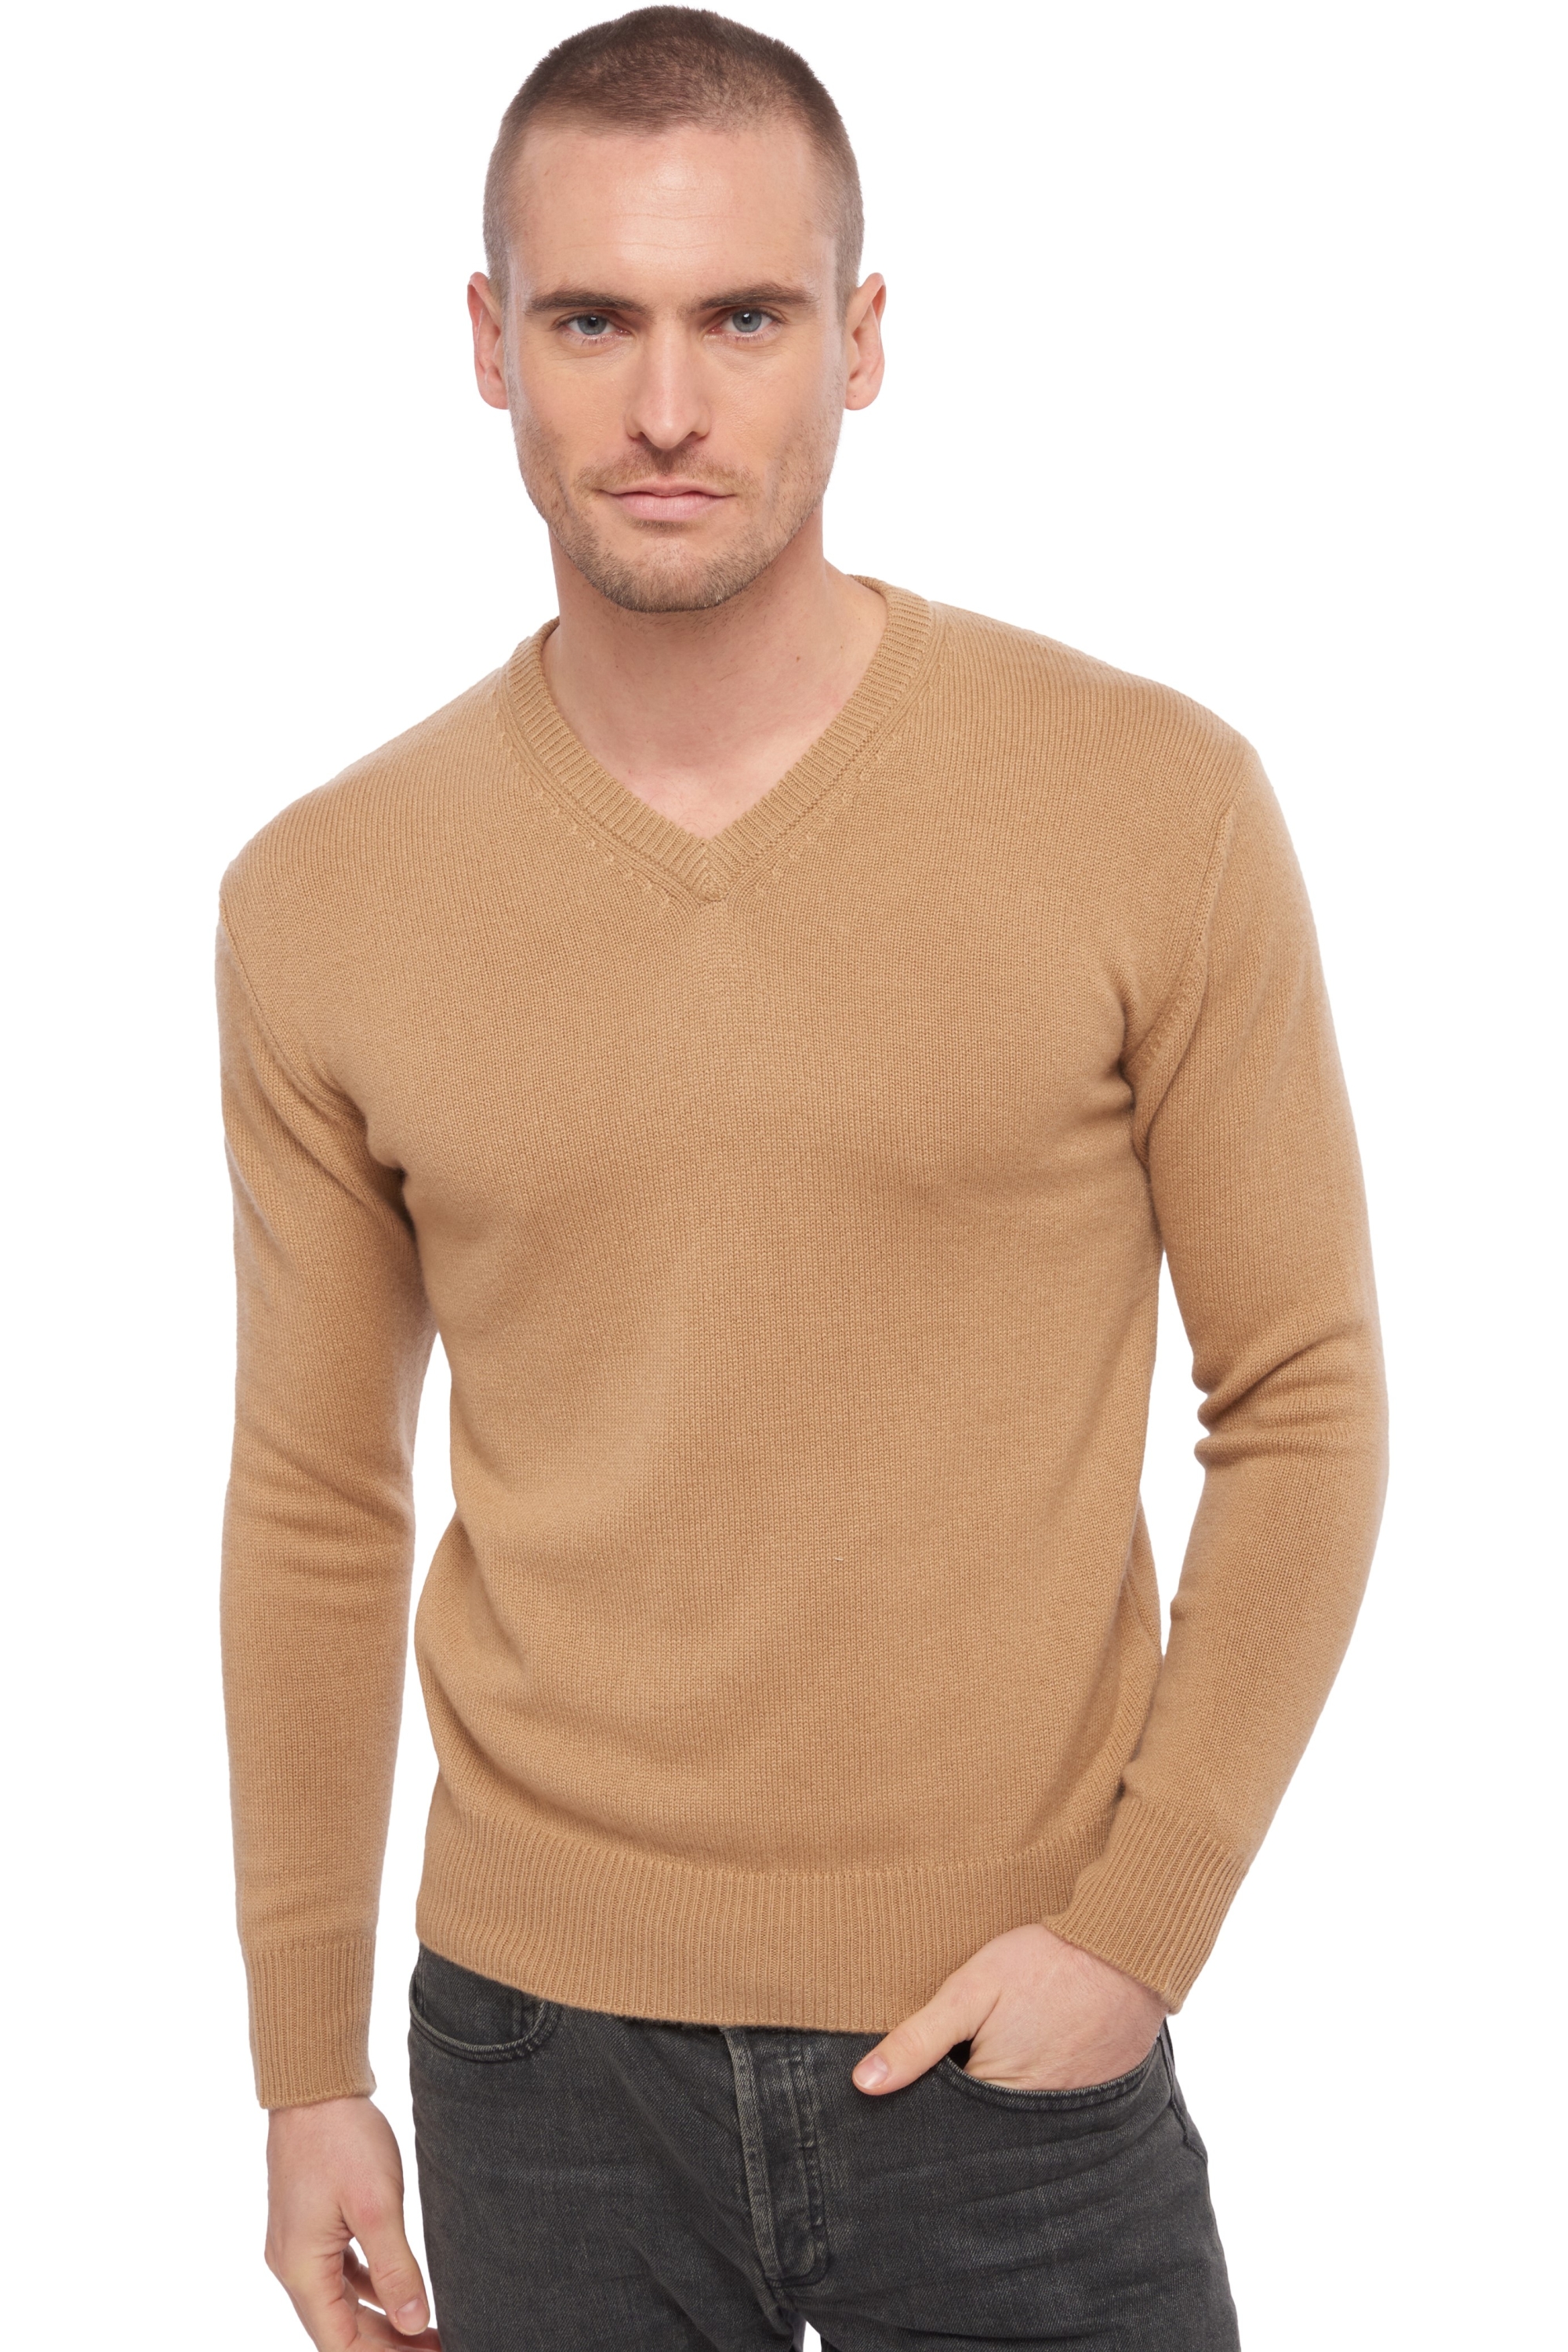 Cachemire pull homme hippolyte 4f camel 2xl